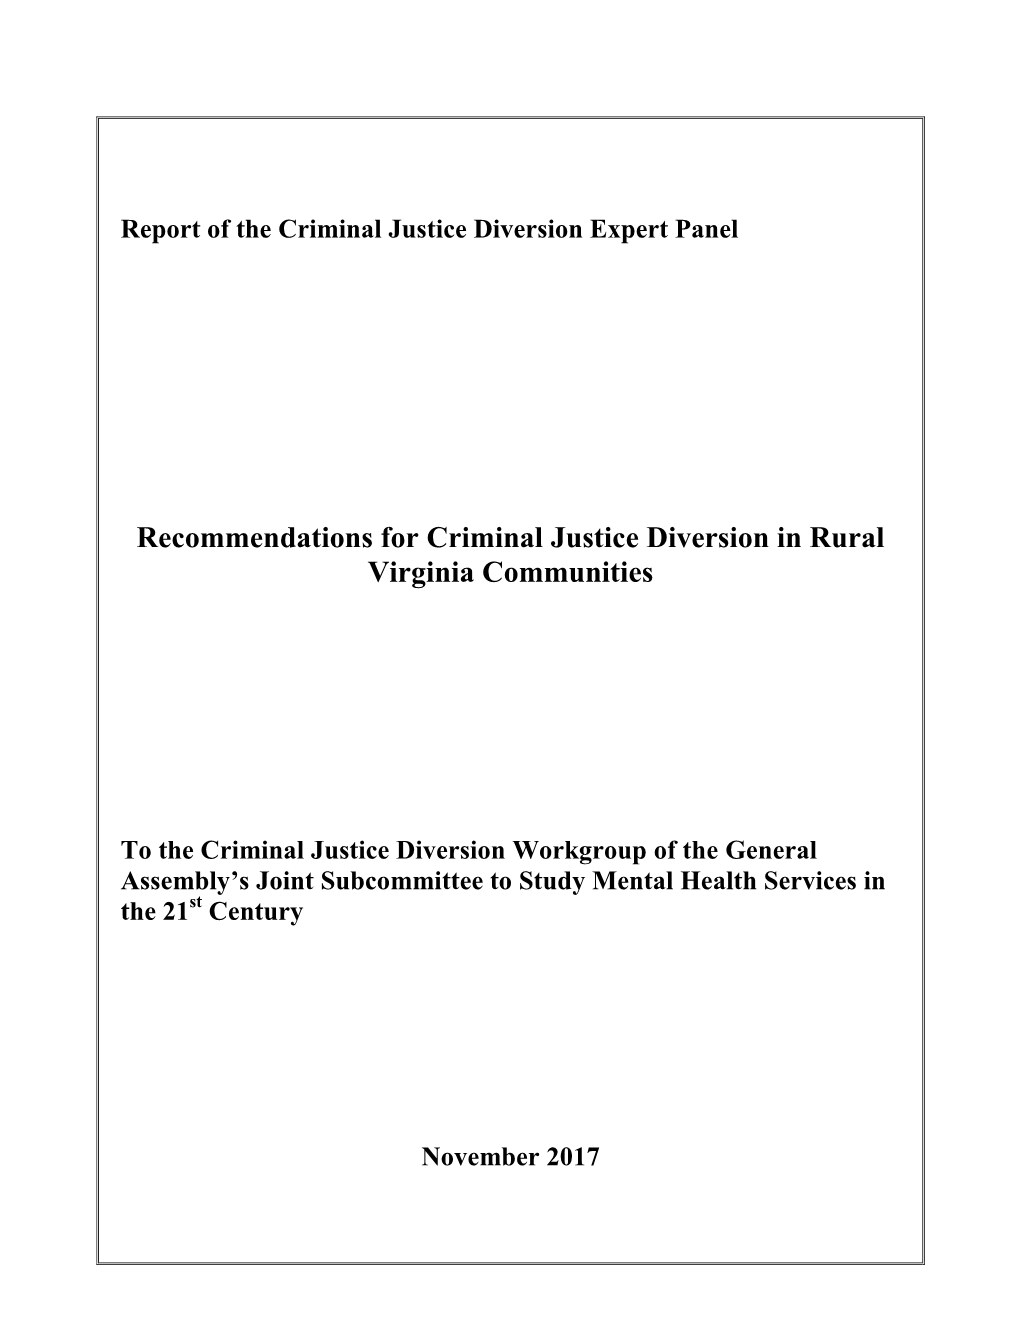 Recommendations for Criminal Justice Diversion in Rural Virginia Communities